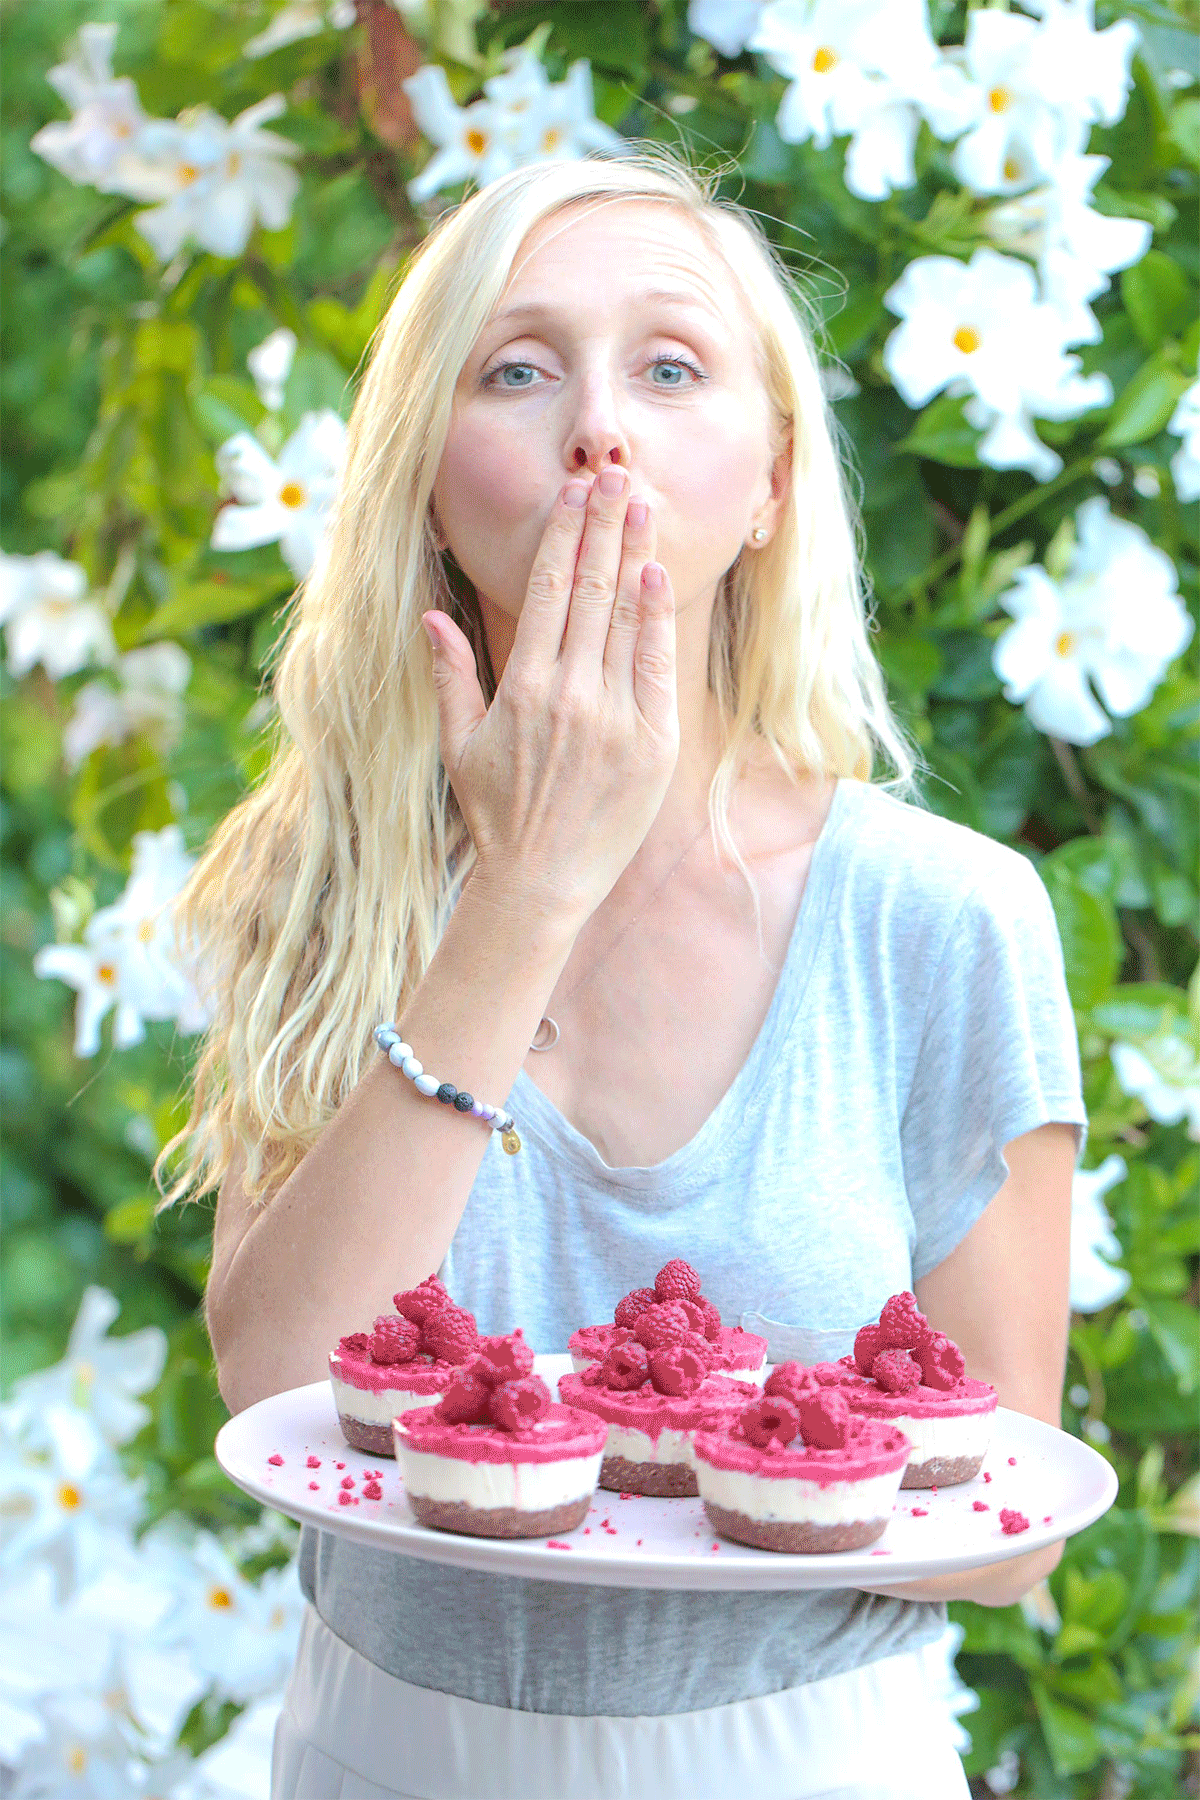 Lady blowing a kiss, holding pretty pink cheesecakes